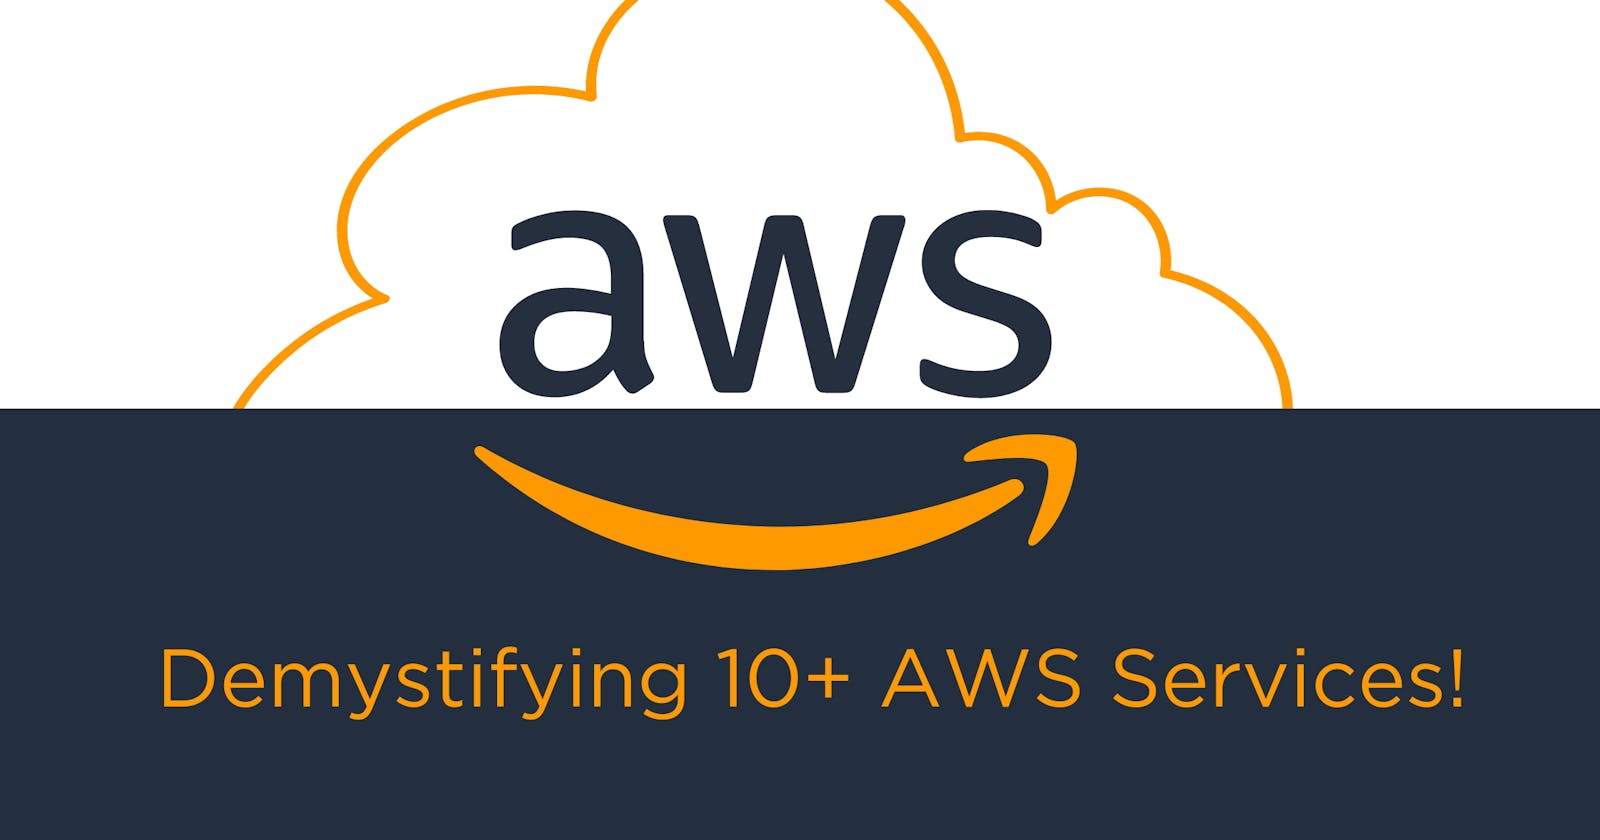 10+ AWS services explained!